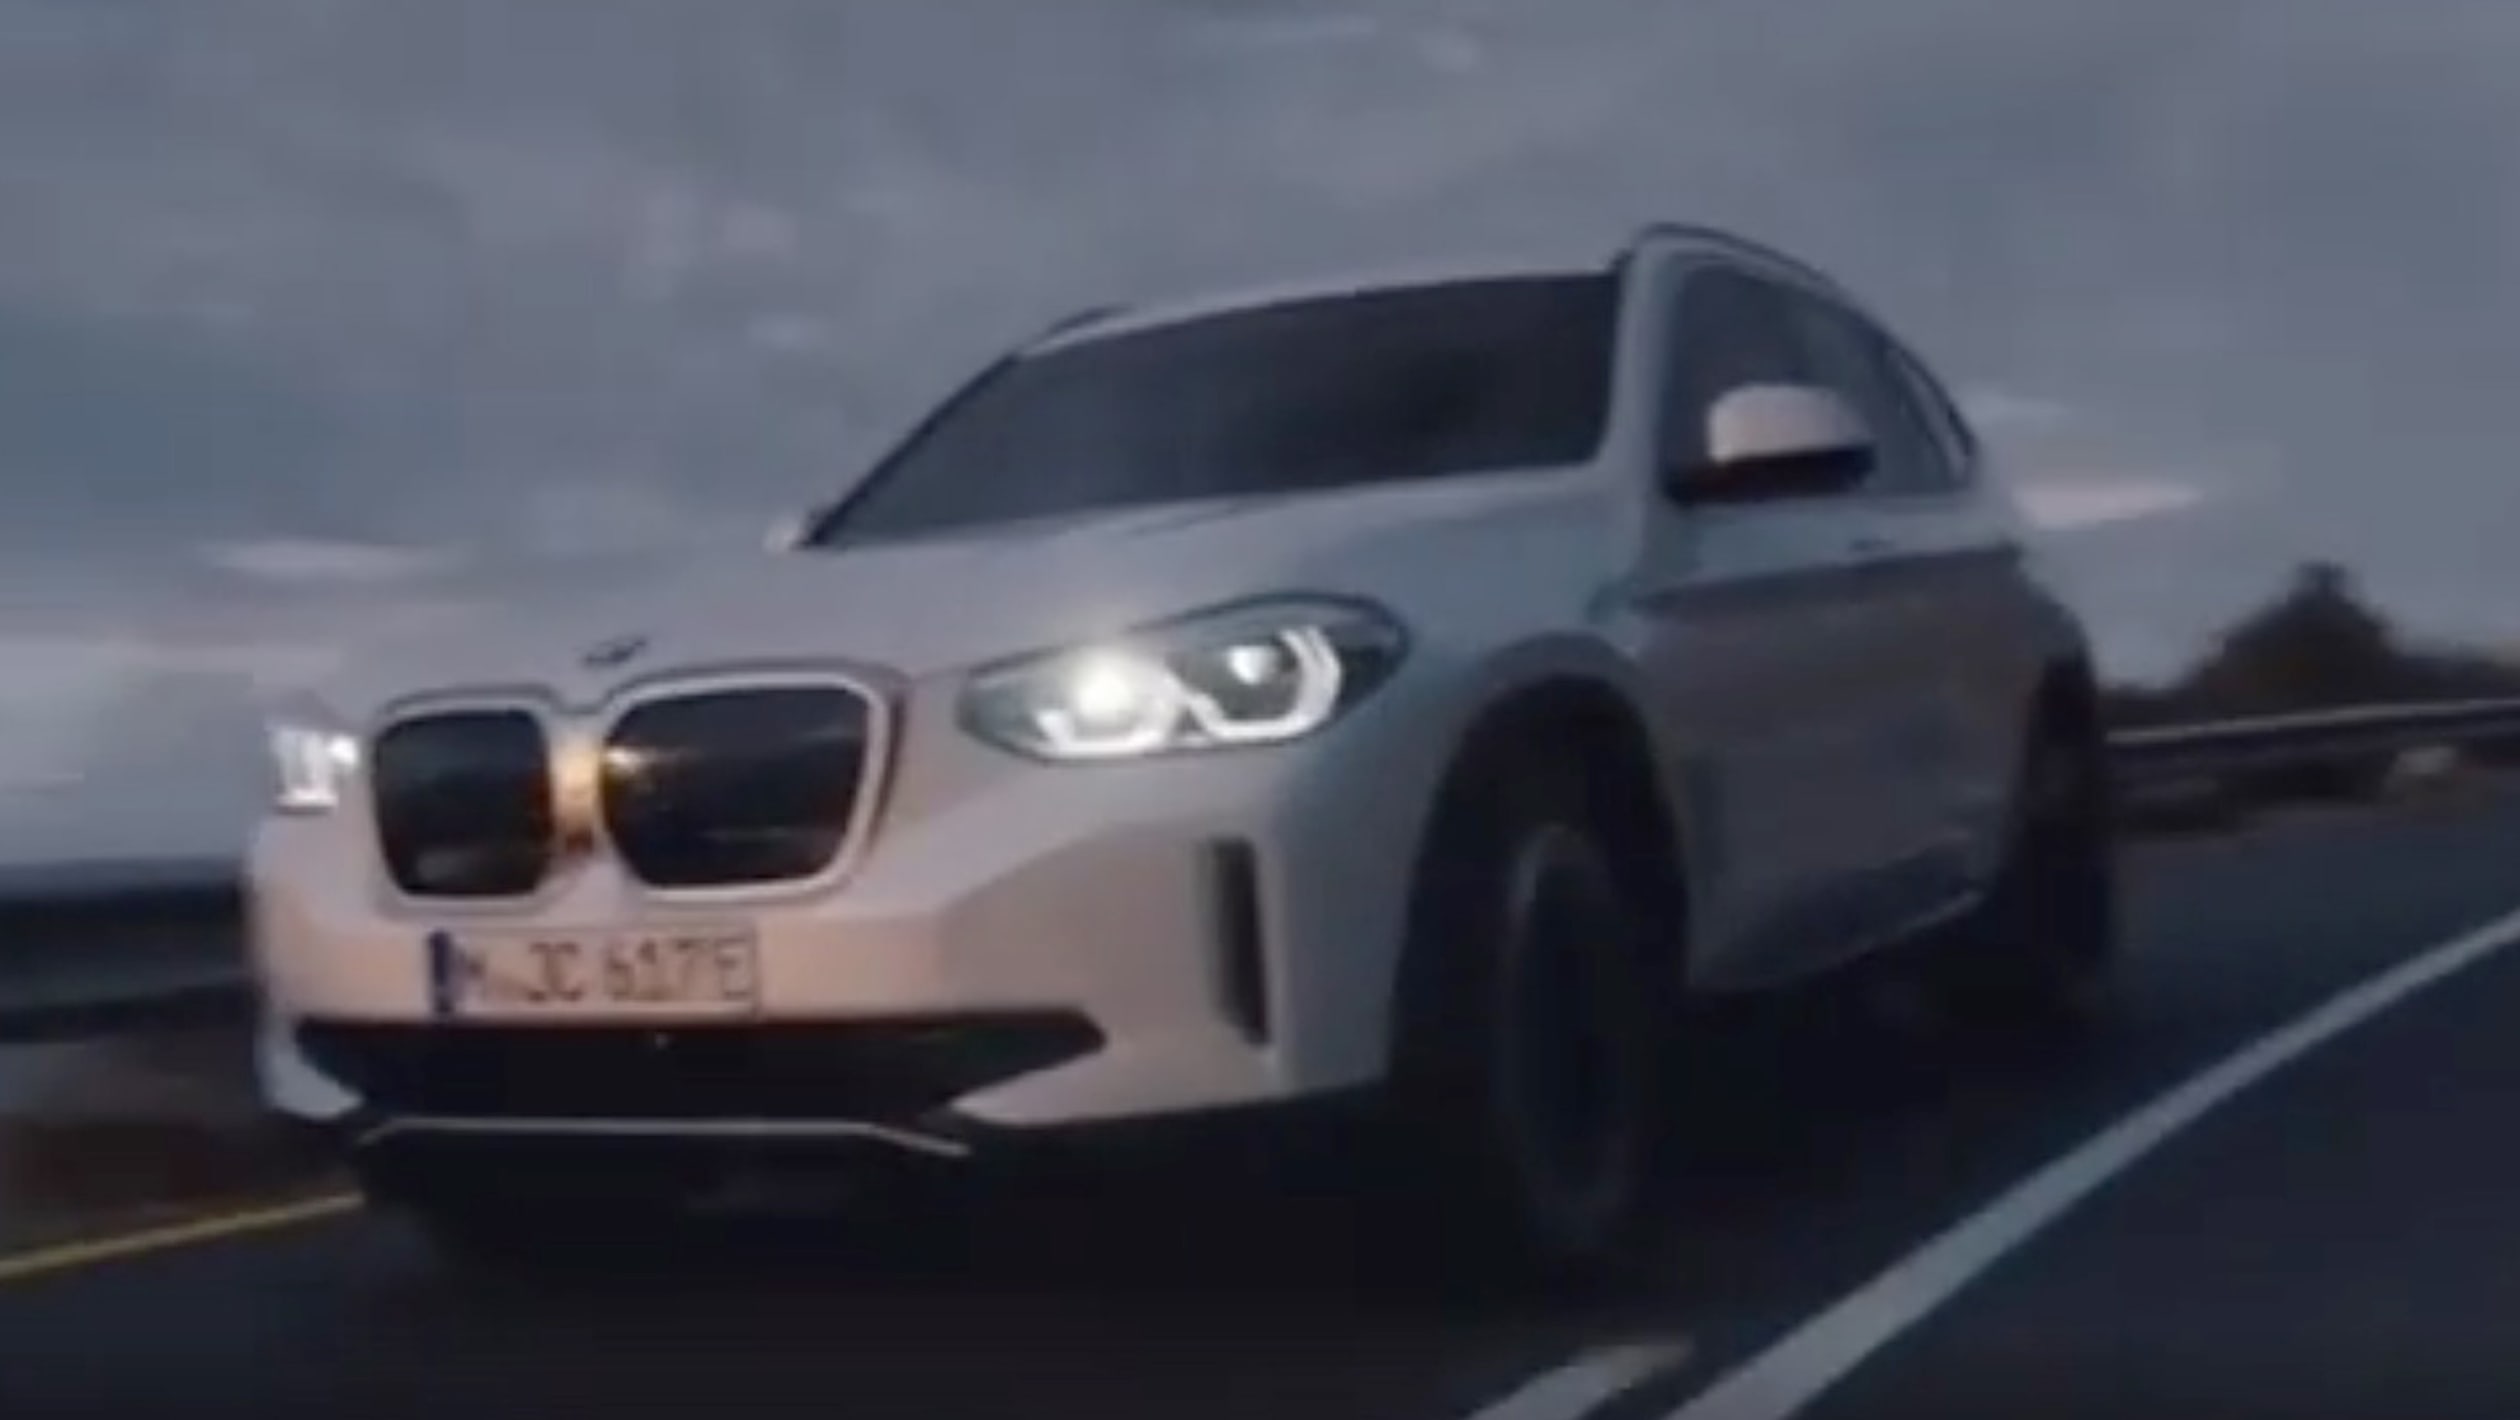 aria-label="BMW iX3 electric SUV leaked images"